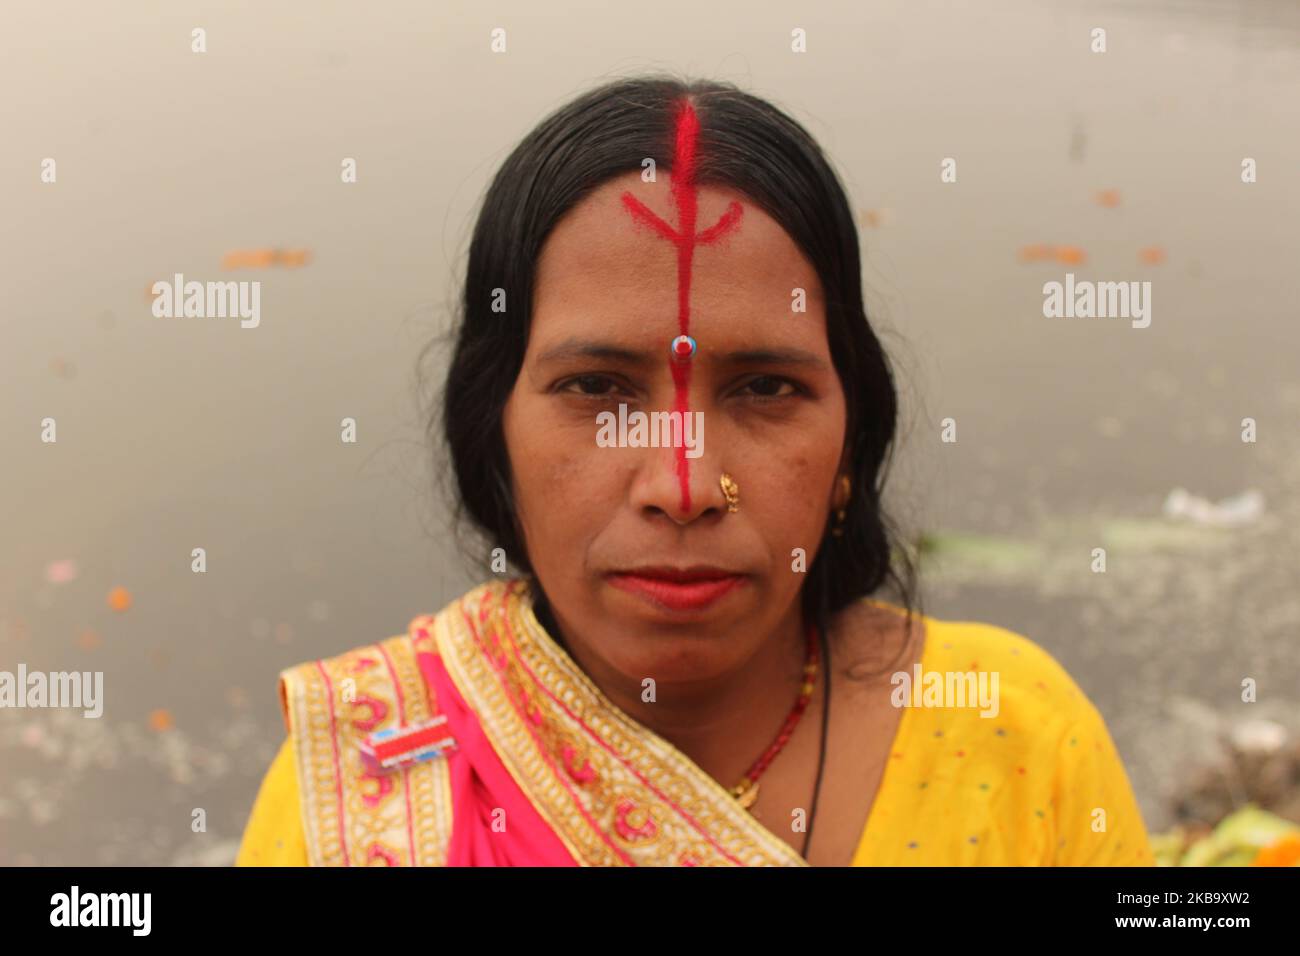 A Hindu devotee is seen during rituals and worshipping the Sun god along the banks of Yamuna River during the religious Hindu festival of Chhath Puja in New Delhi on November 13, 2018. The rituals involve taking dips in rivers or water bodies, strict fasting, standing and offering prayers in water, facing the sun for long periods and also offering Prasad to the sun at sunrise and sunset. (Photo by Mayank Makhija/NurPhoto) Stock Photo